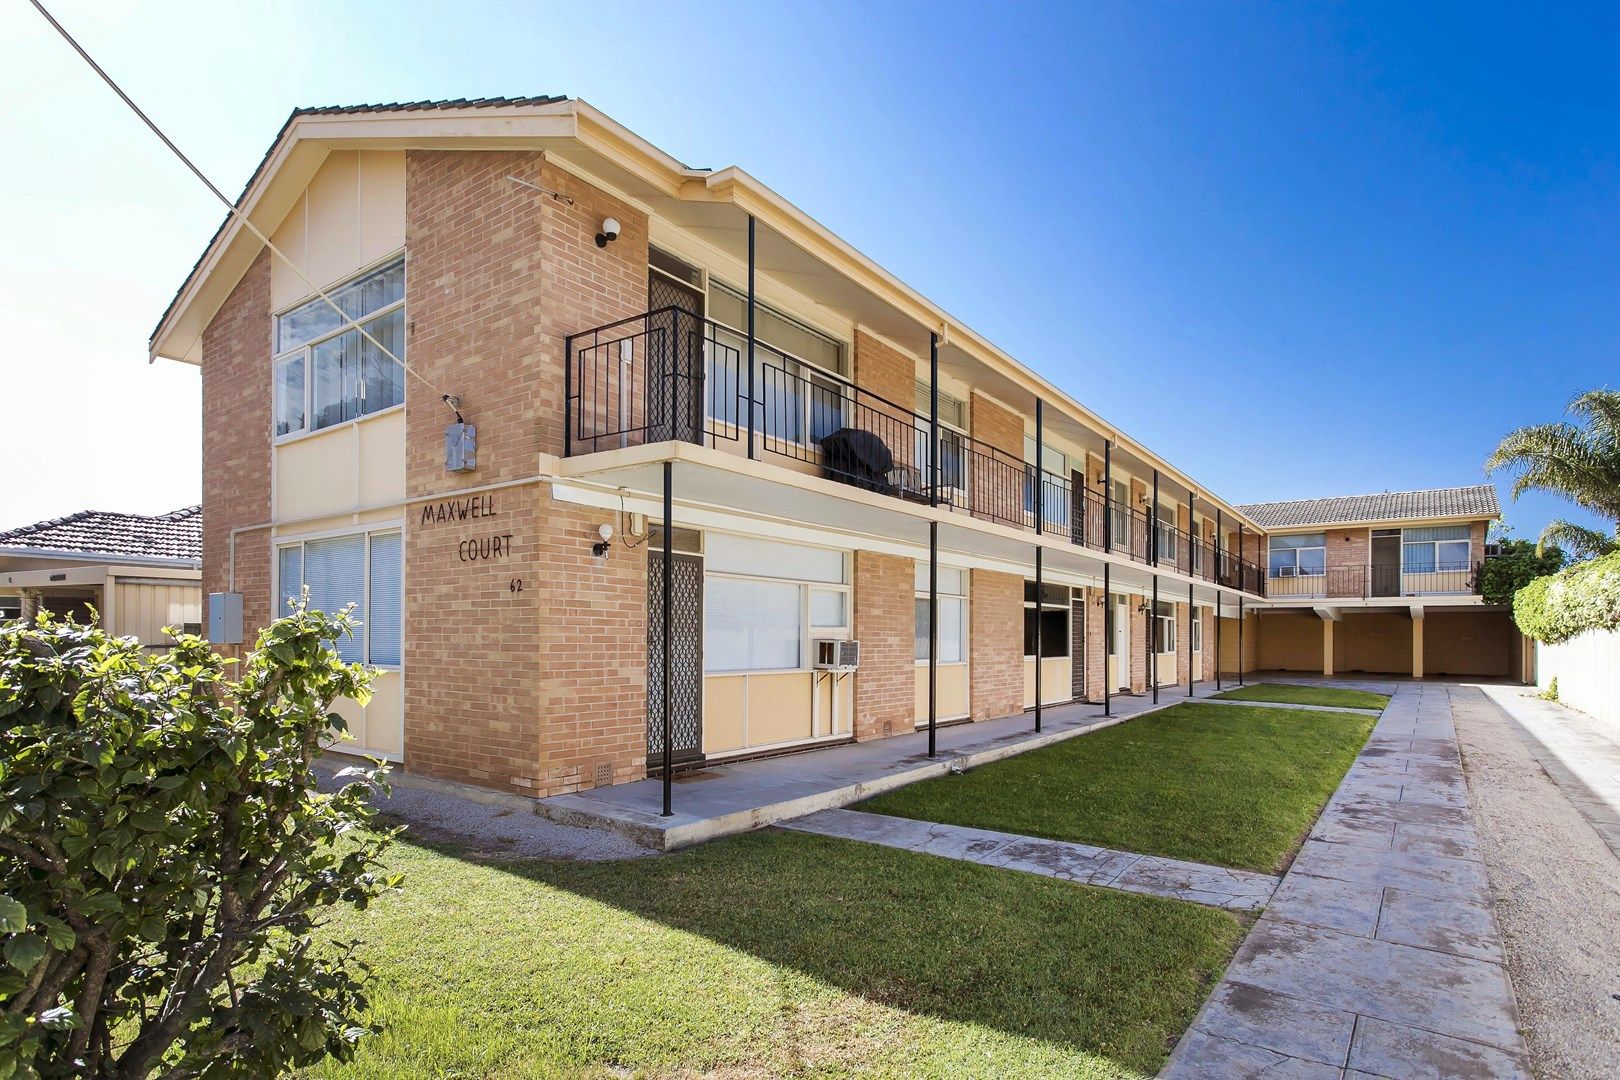 2 bedrooms Apartment / Unit / Flat in 3/62 Maxwell Terrace GLENGOWRIE SA, 5044